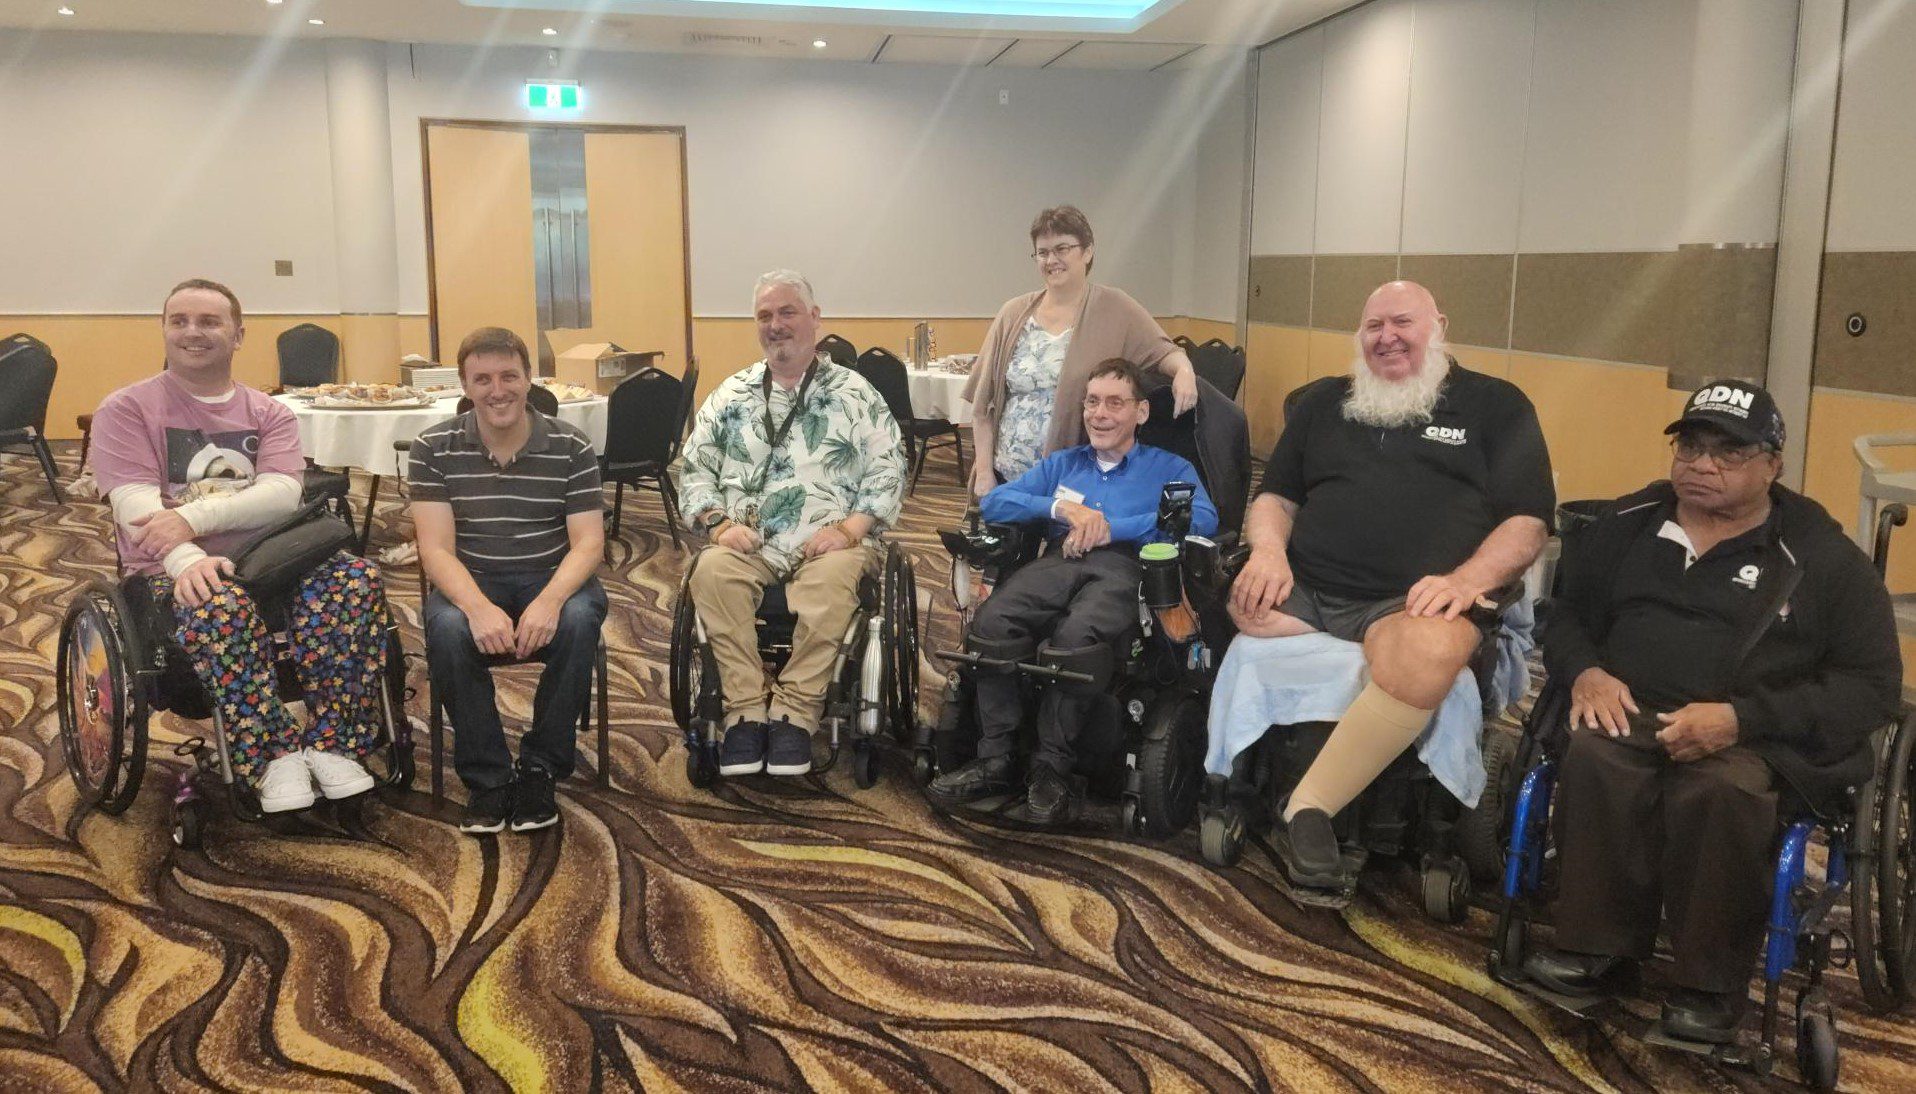 A group of people, some sitting in chairs, some in sitting in wheelchairs and one woman standing.